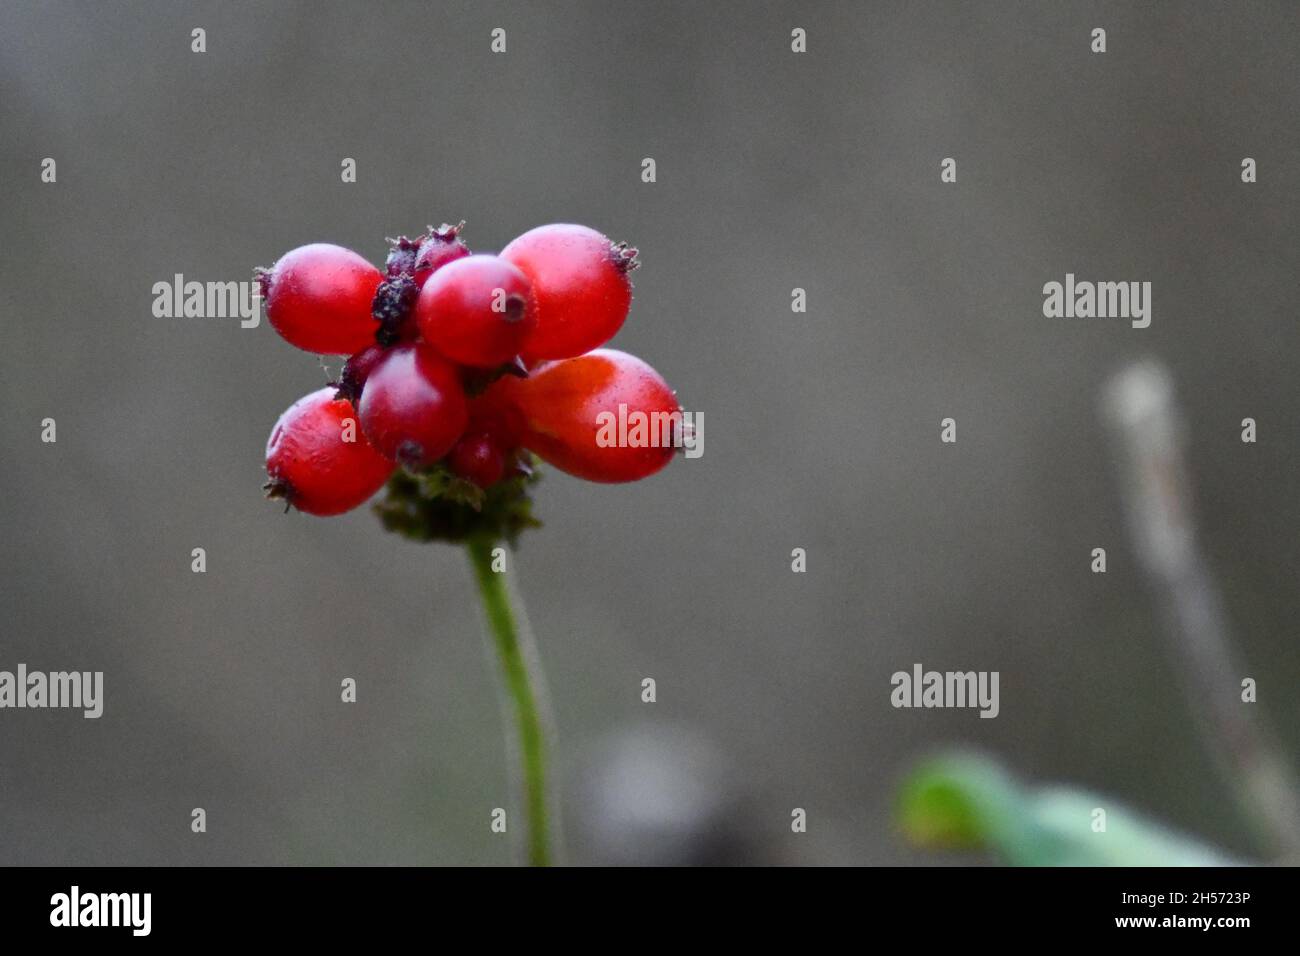 A cluster of red honeysuckle, Lonicera periclymenum, berries standing on an autumnal day Stock Photo